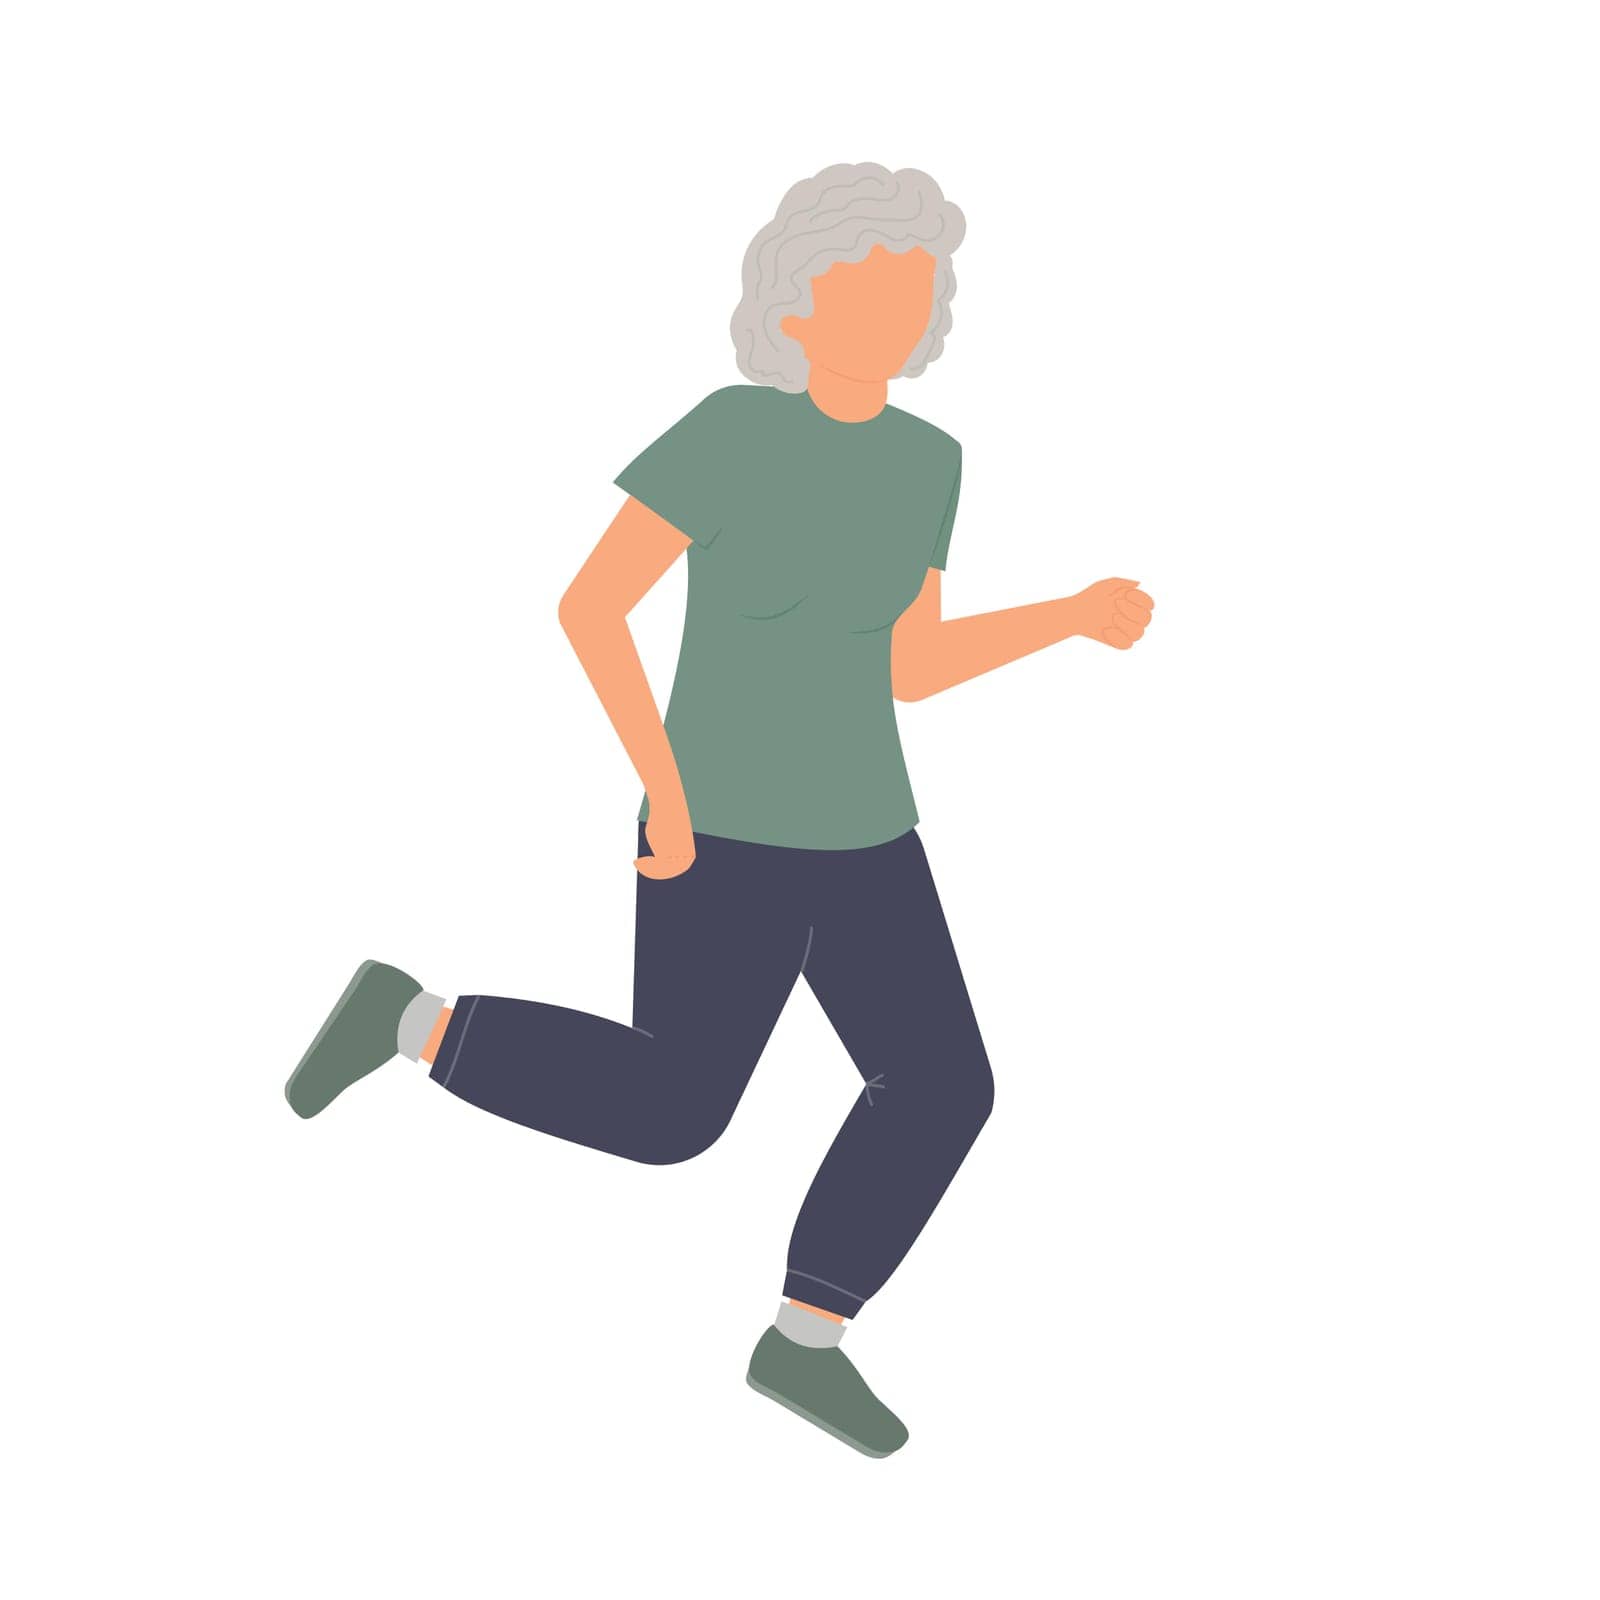 Elderly lady doing sports outdoor. Sports, leisure for Senior People. Active old age. Vector illustration